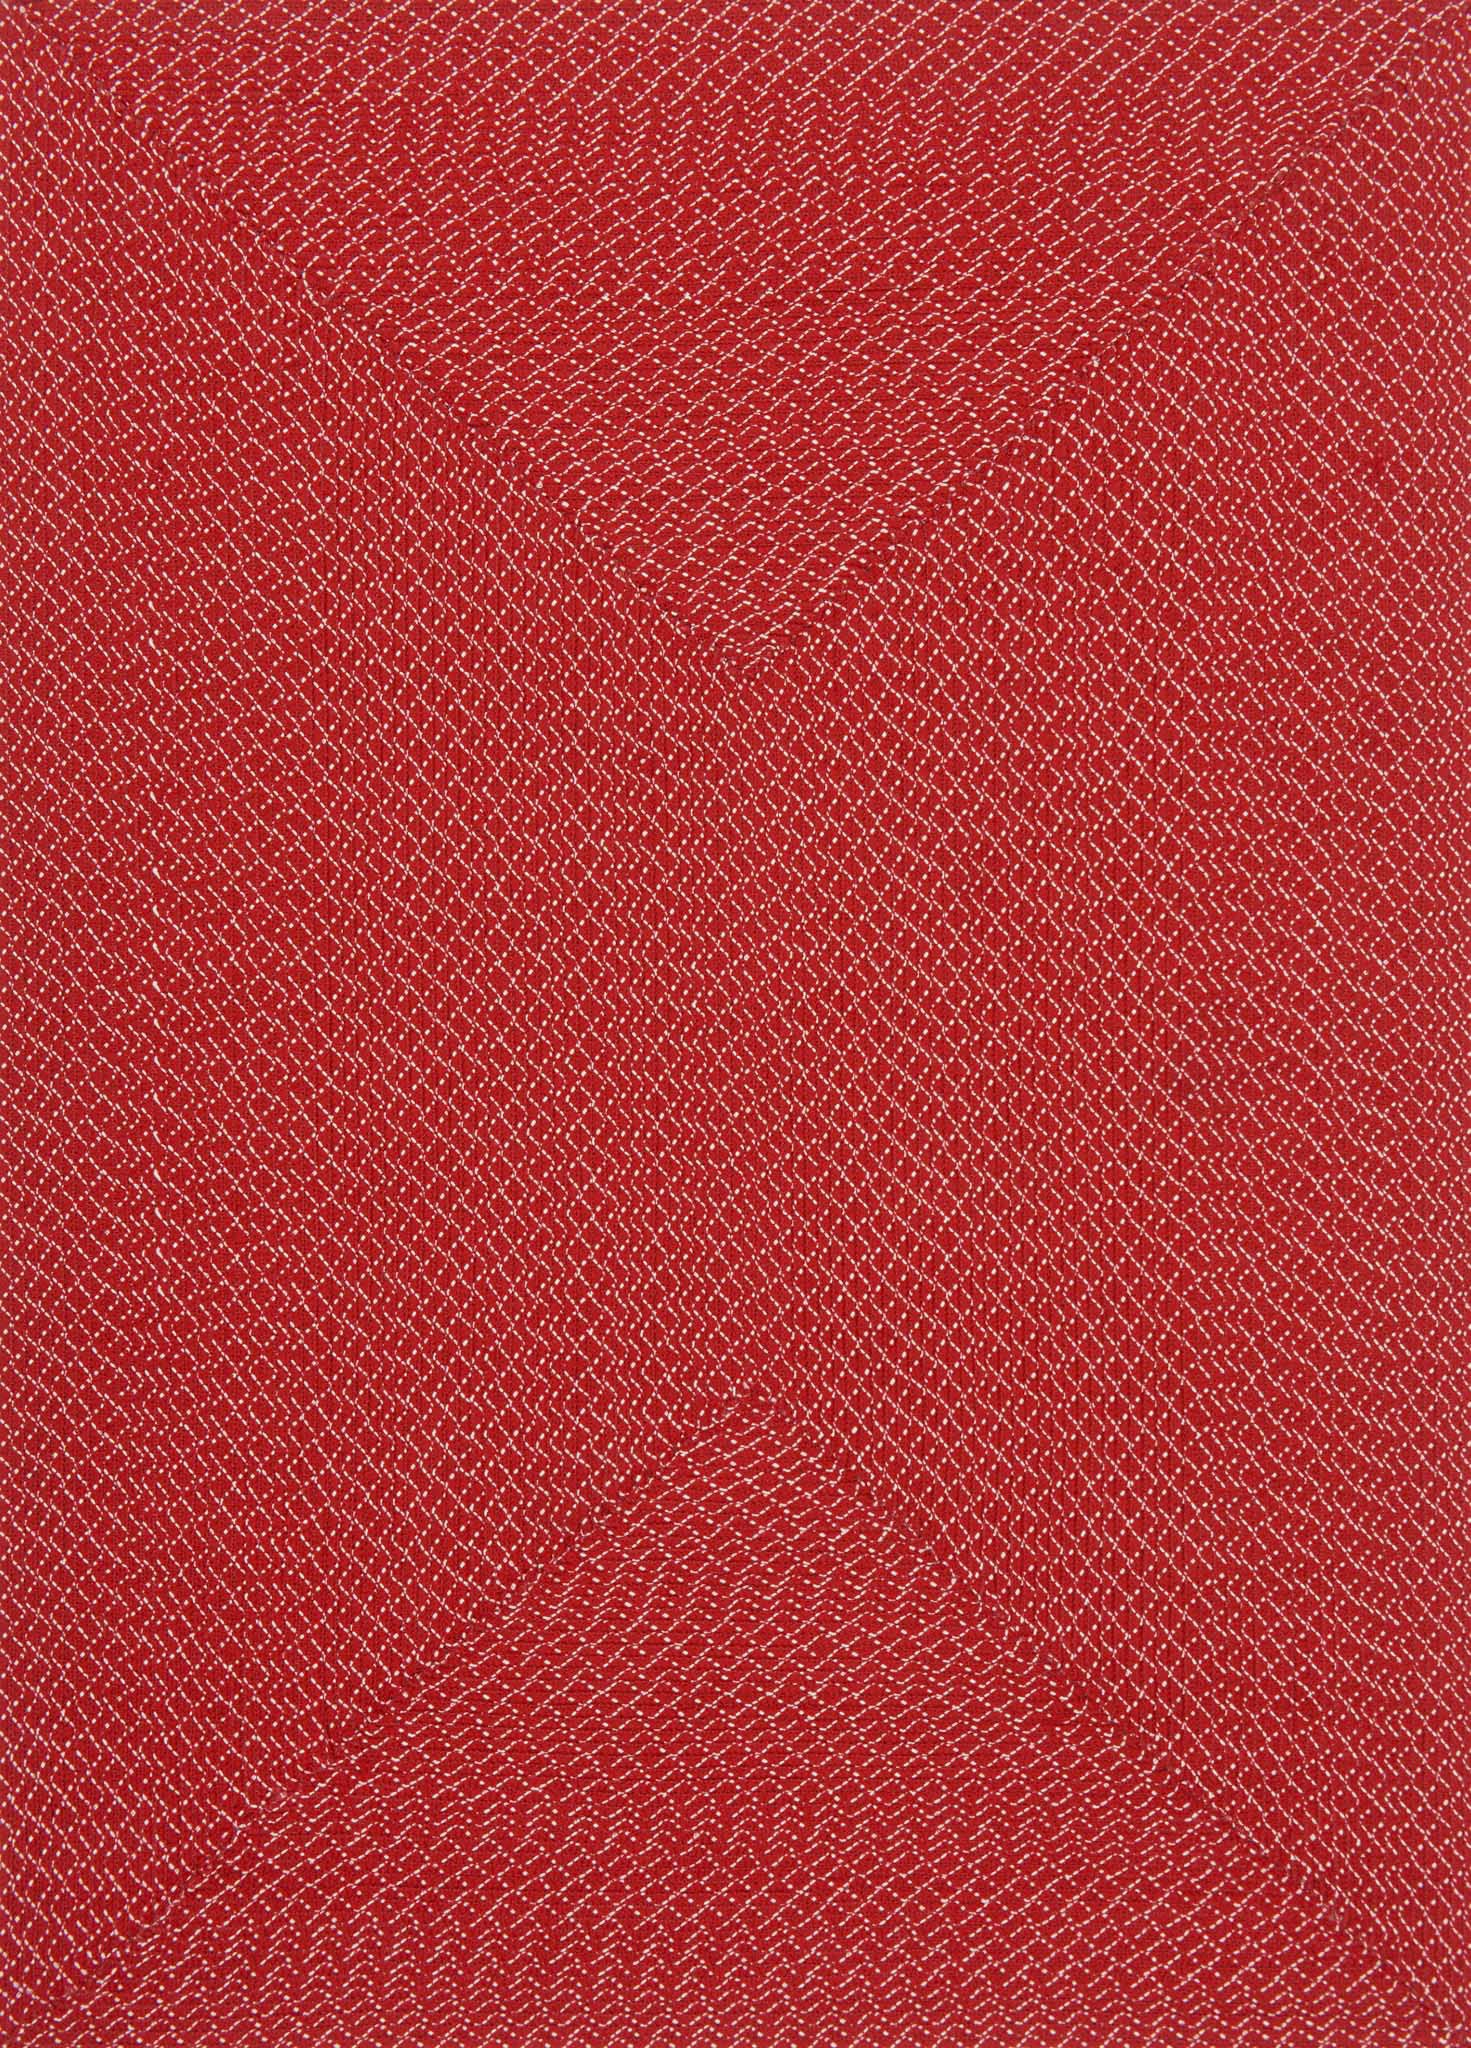 Loloi Wylie WB-01 Red Area Rug main image